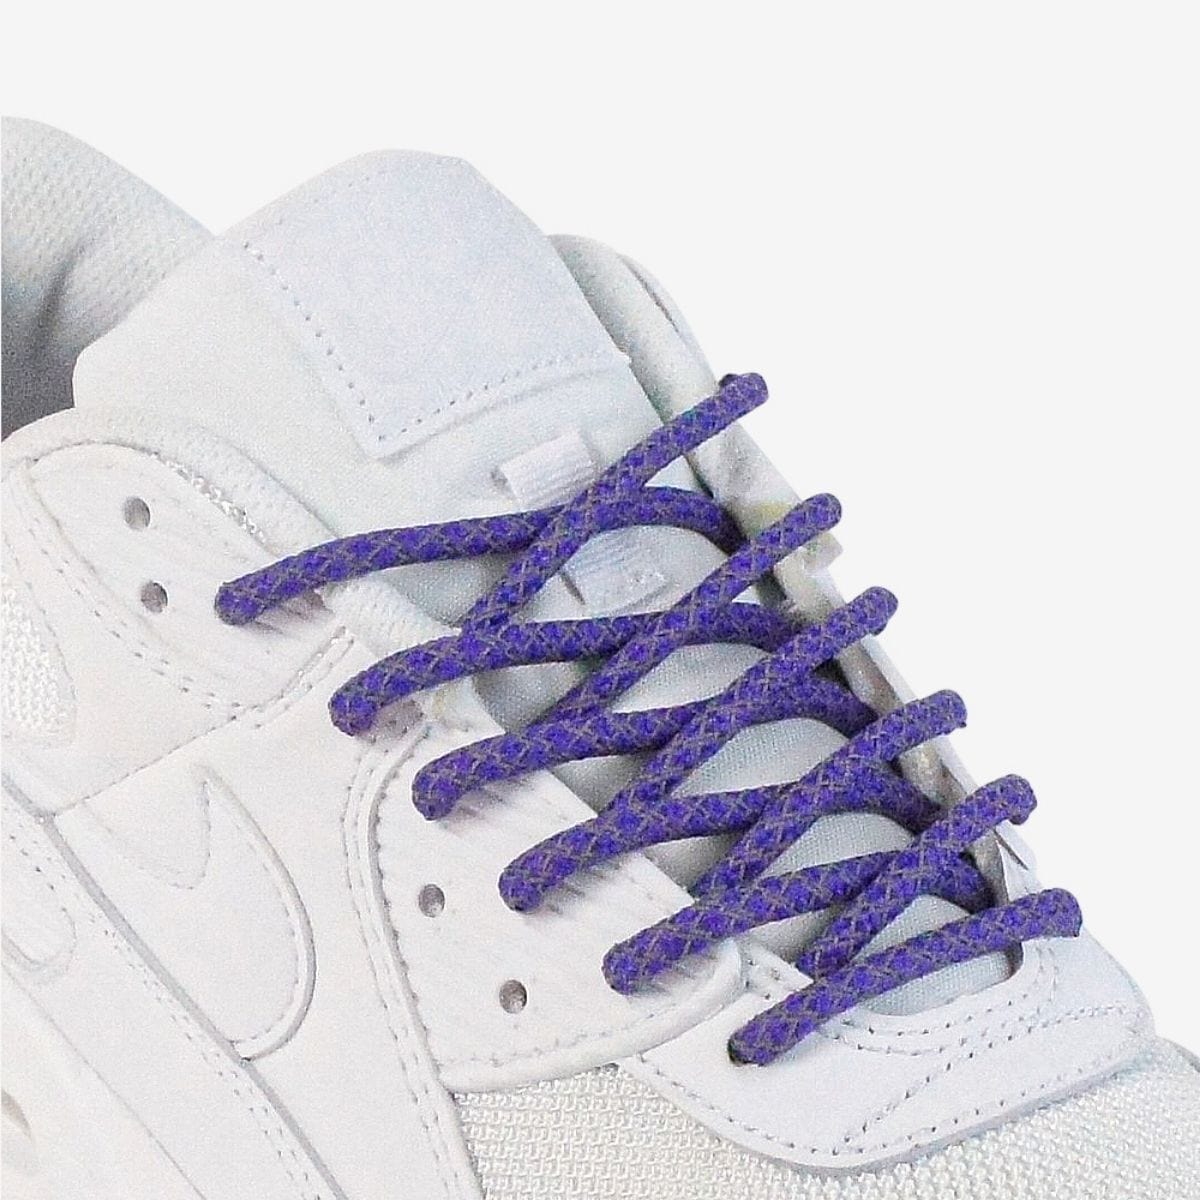 custom-color-shoelaces-on-white-sneakers-with-reflective-purple-laces